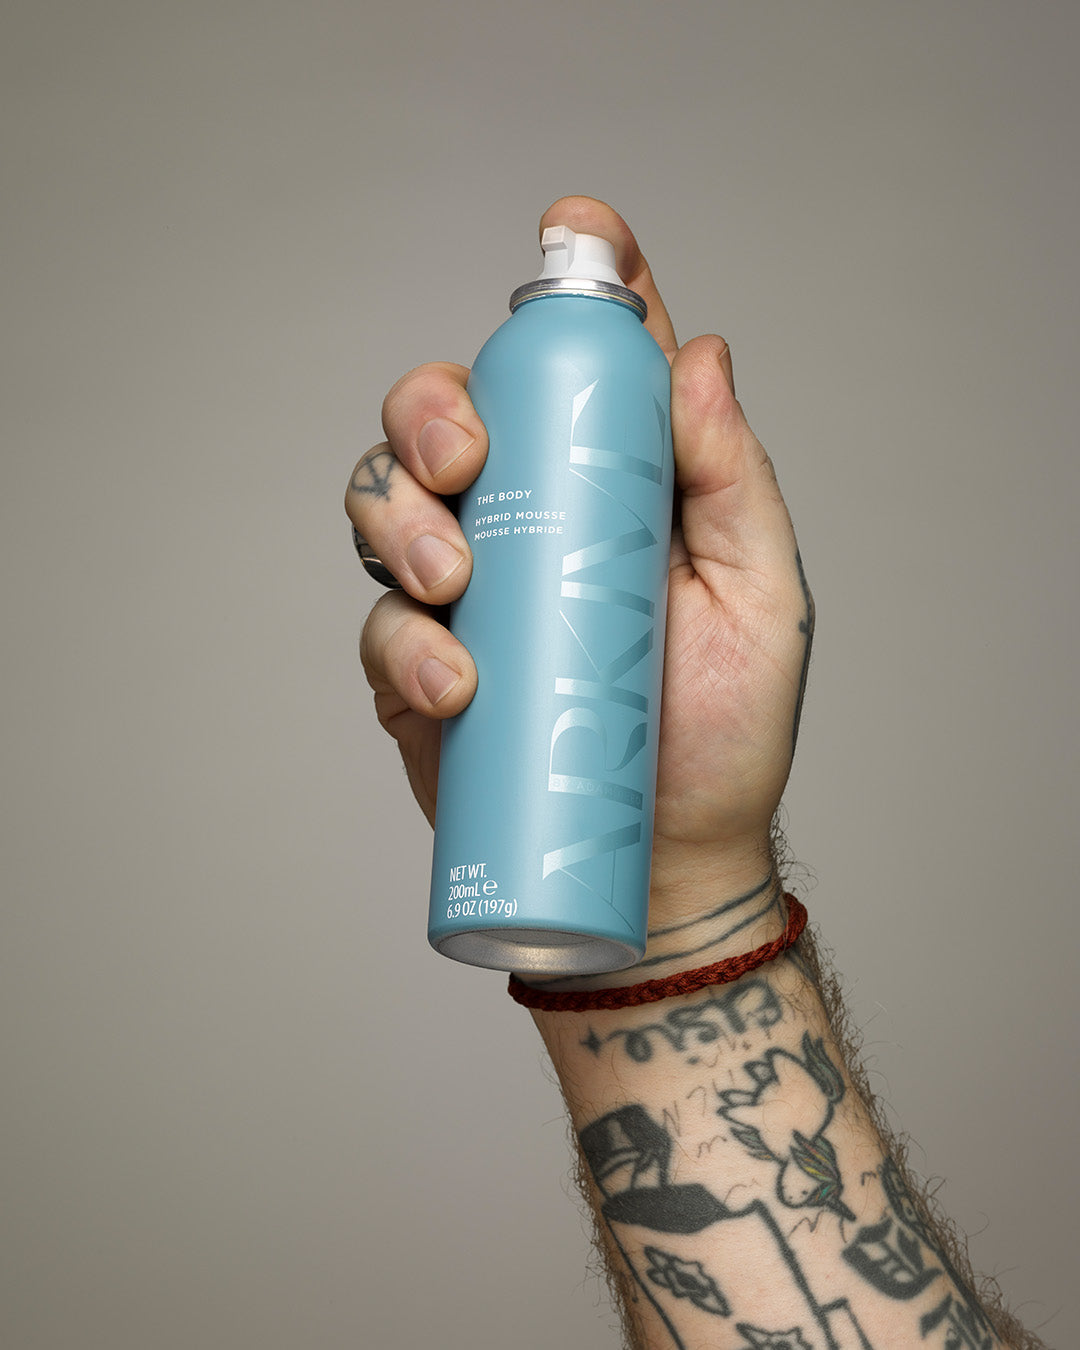 A bottle of Arkive's 'The Body' hybrid hair mousse held in the hand